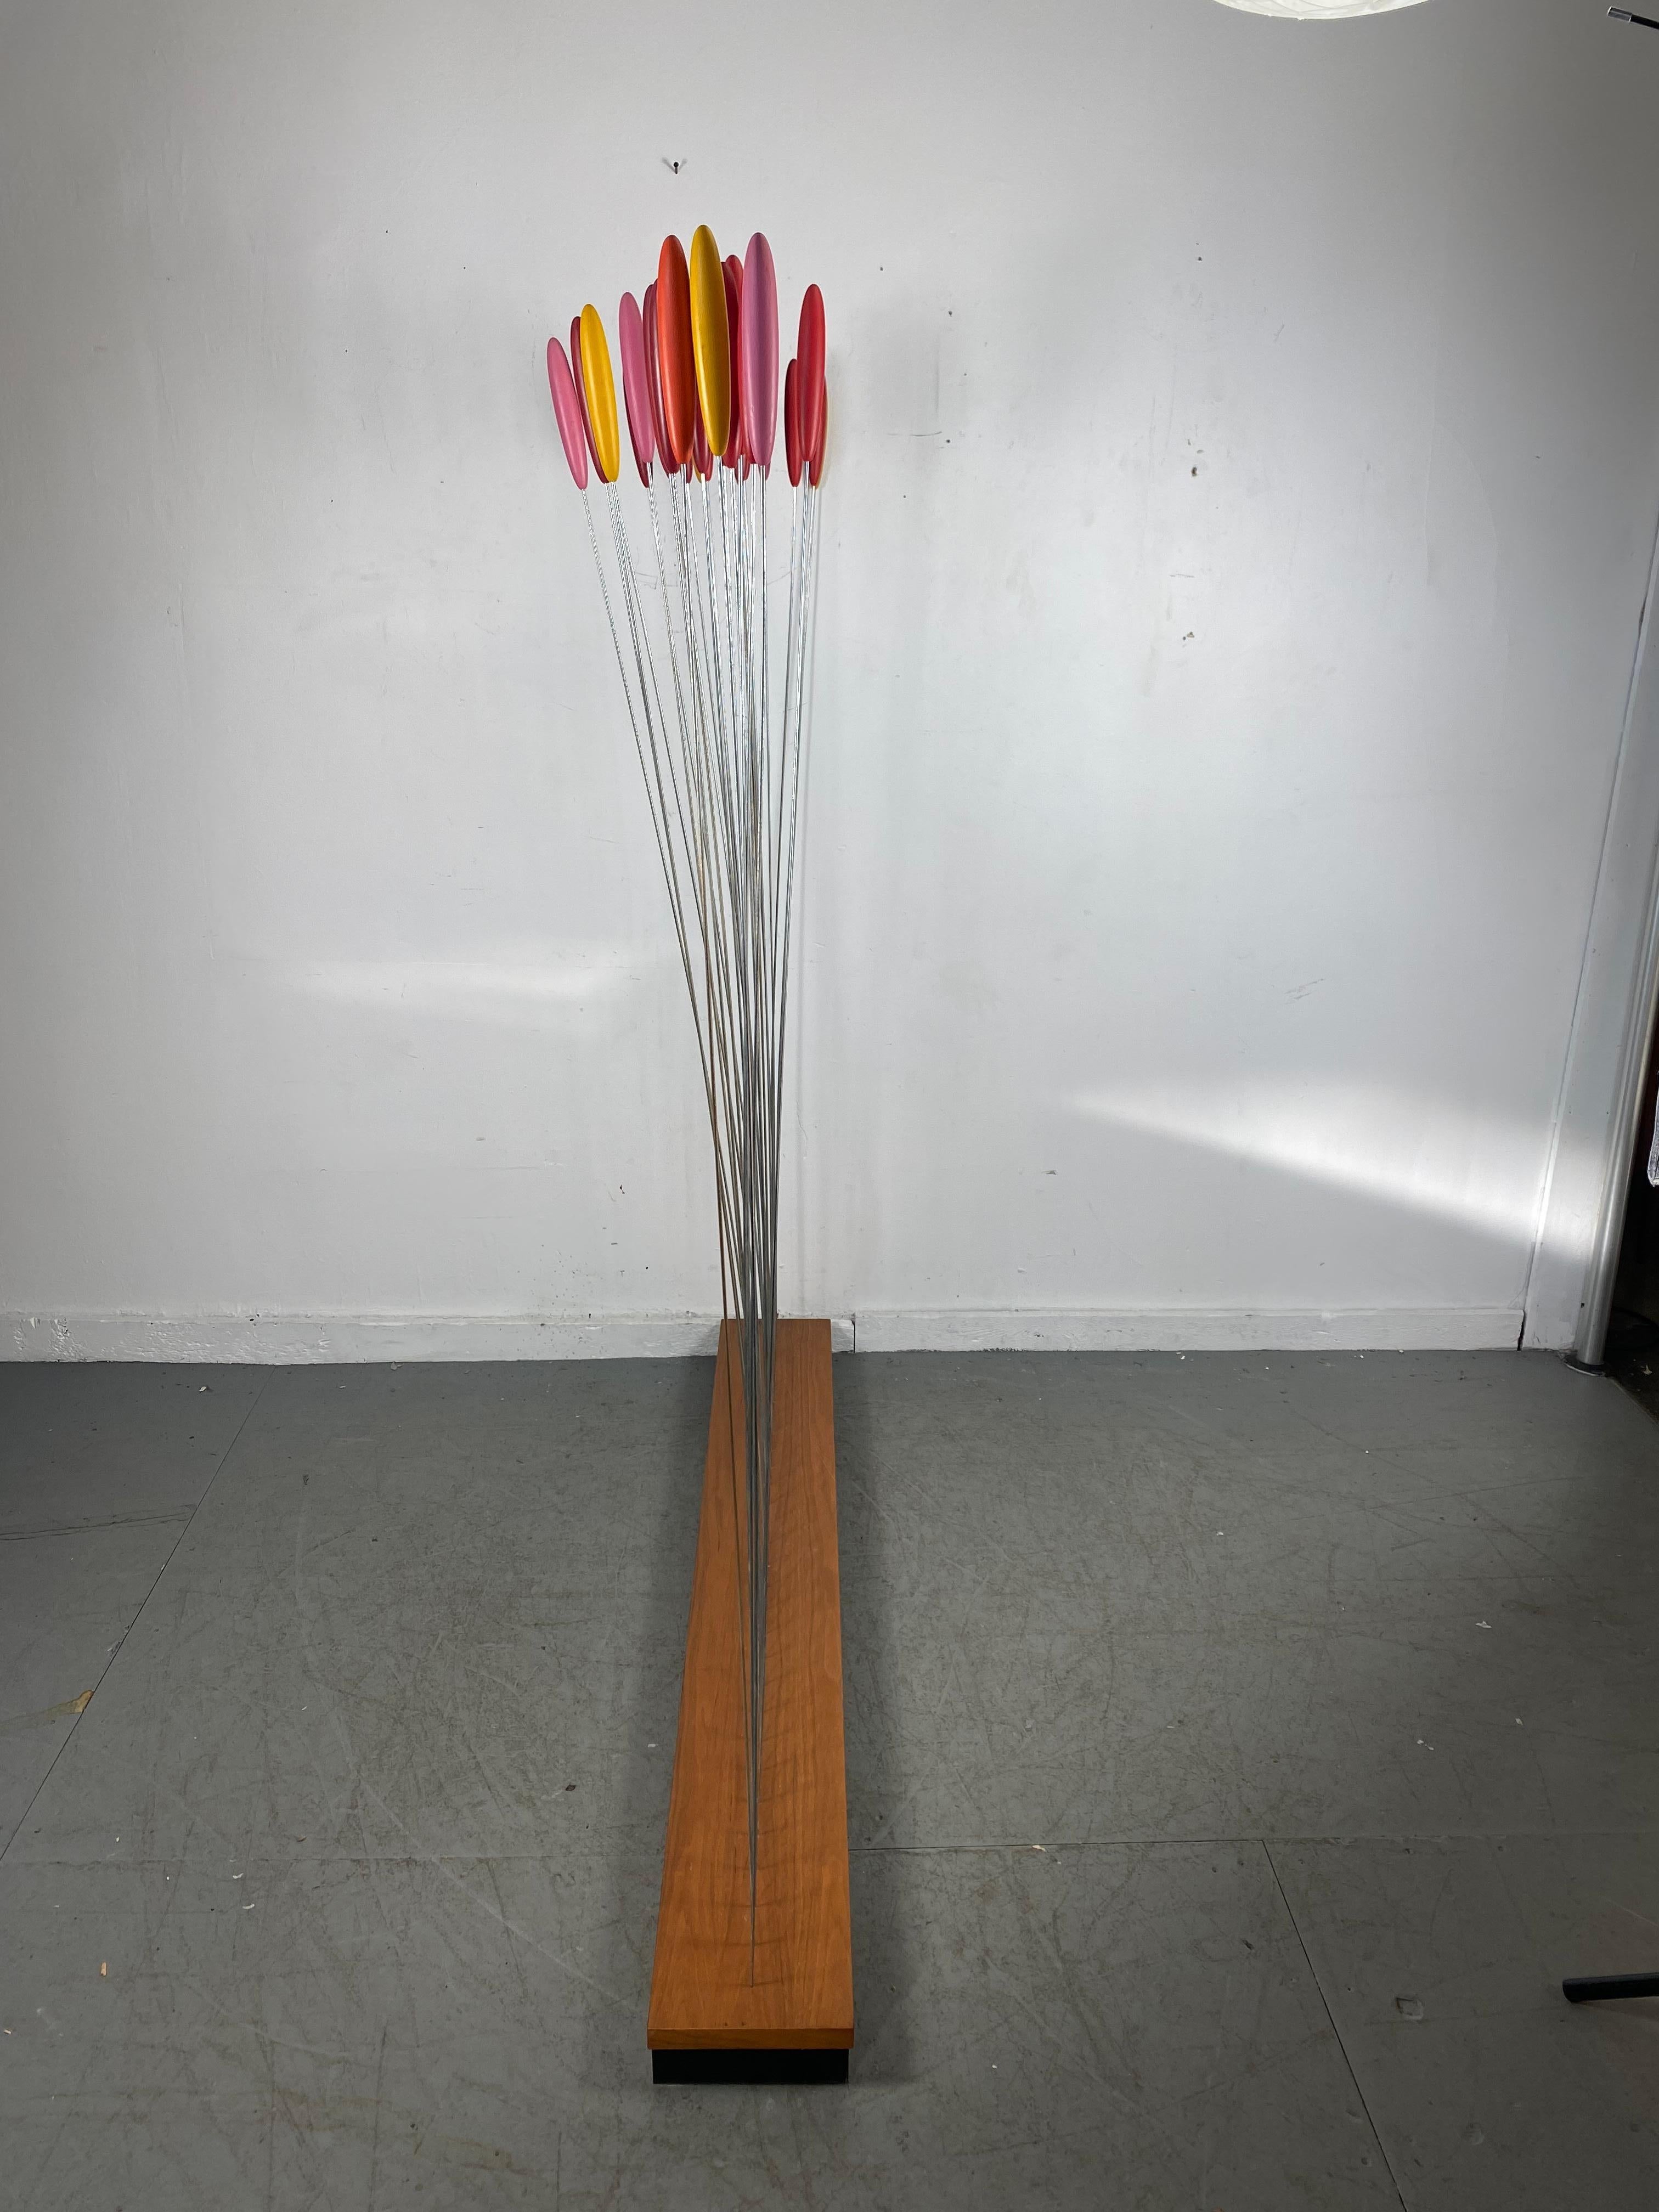 Rare Bill Curry Cattail Room Divider / Sculpture for Design Line 29 Cattails   In Good Condition For Sale In Buffalo, NY